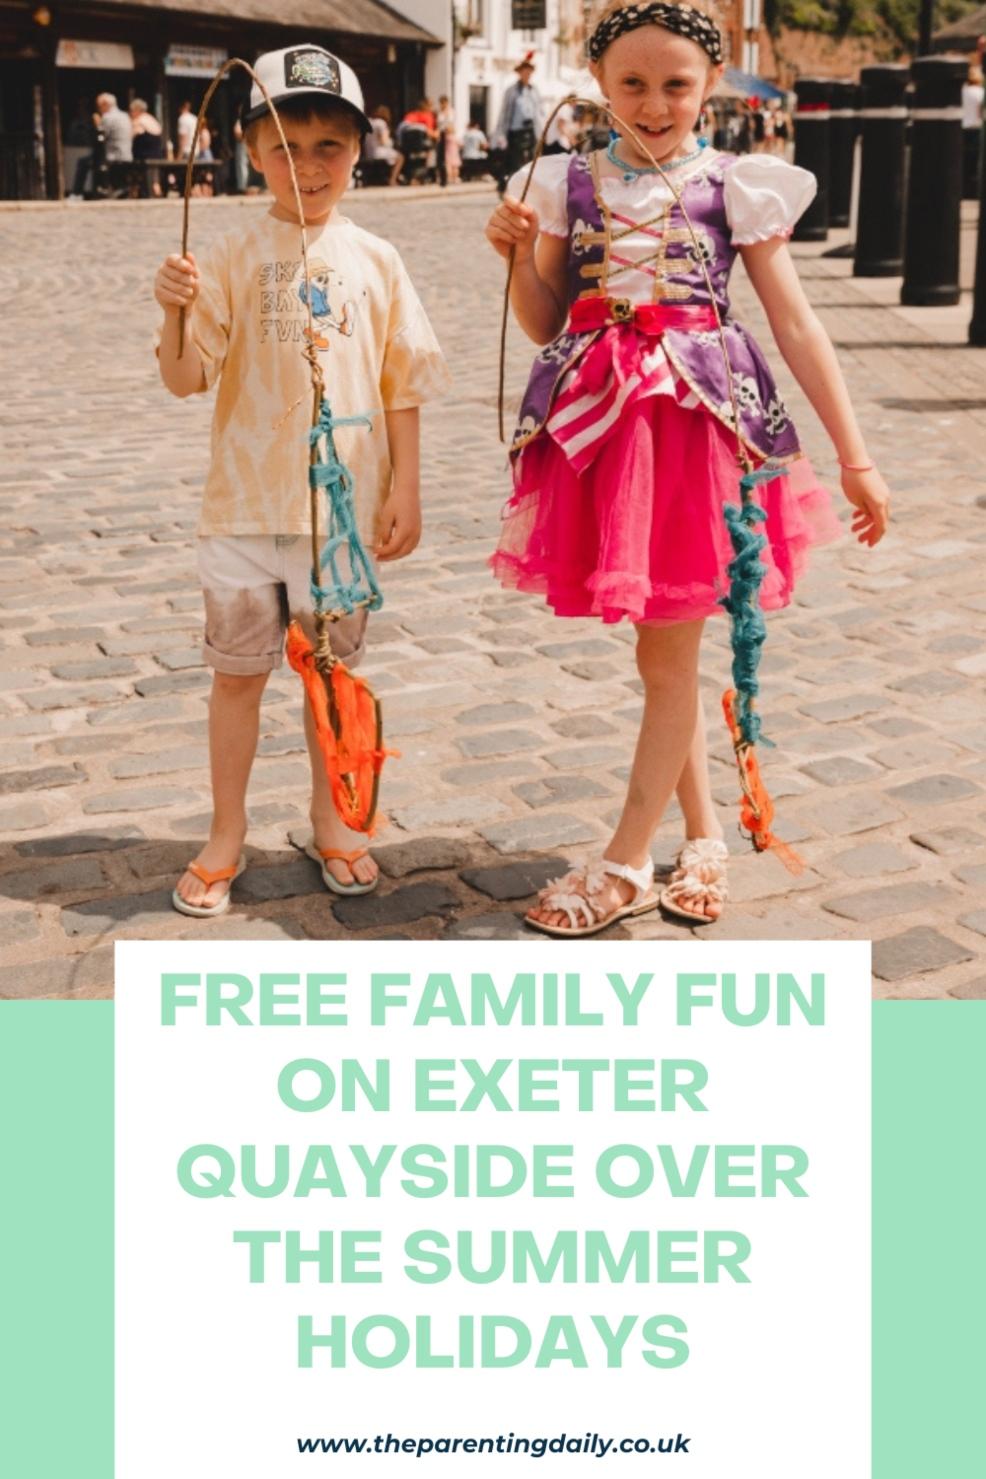 picture of FREE FAMILY FUN ON EXETER QUAYSIDE OVER THE SUMMER HOLIDAYS